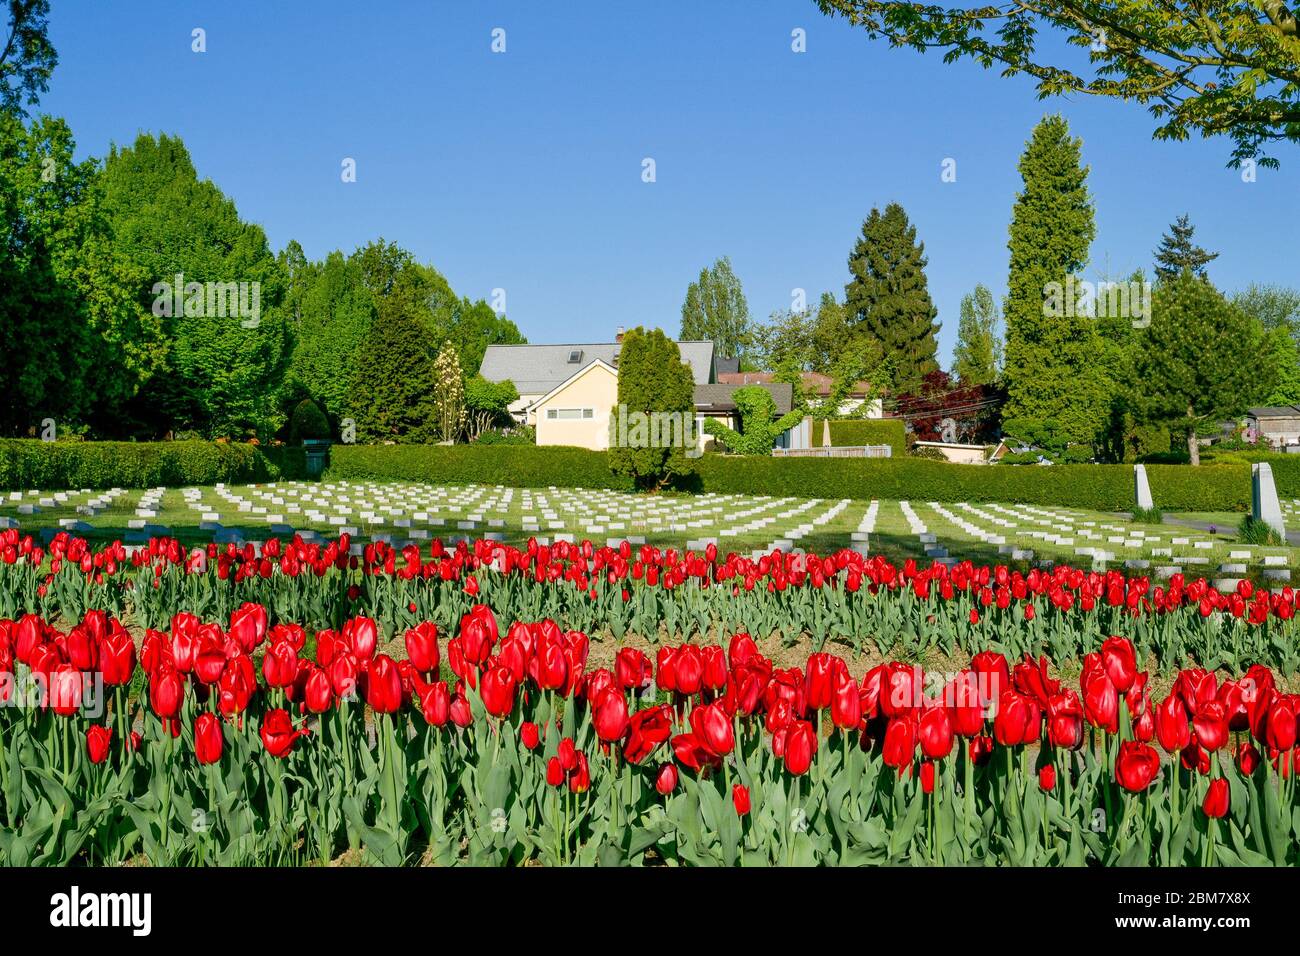 Red tulips, commemorating 75th Anniversary of the Liberation of the Netherlands, Mountain View Cemetery, Vancouver, British Columbia, Canada Stock Photo